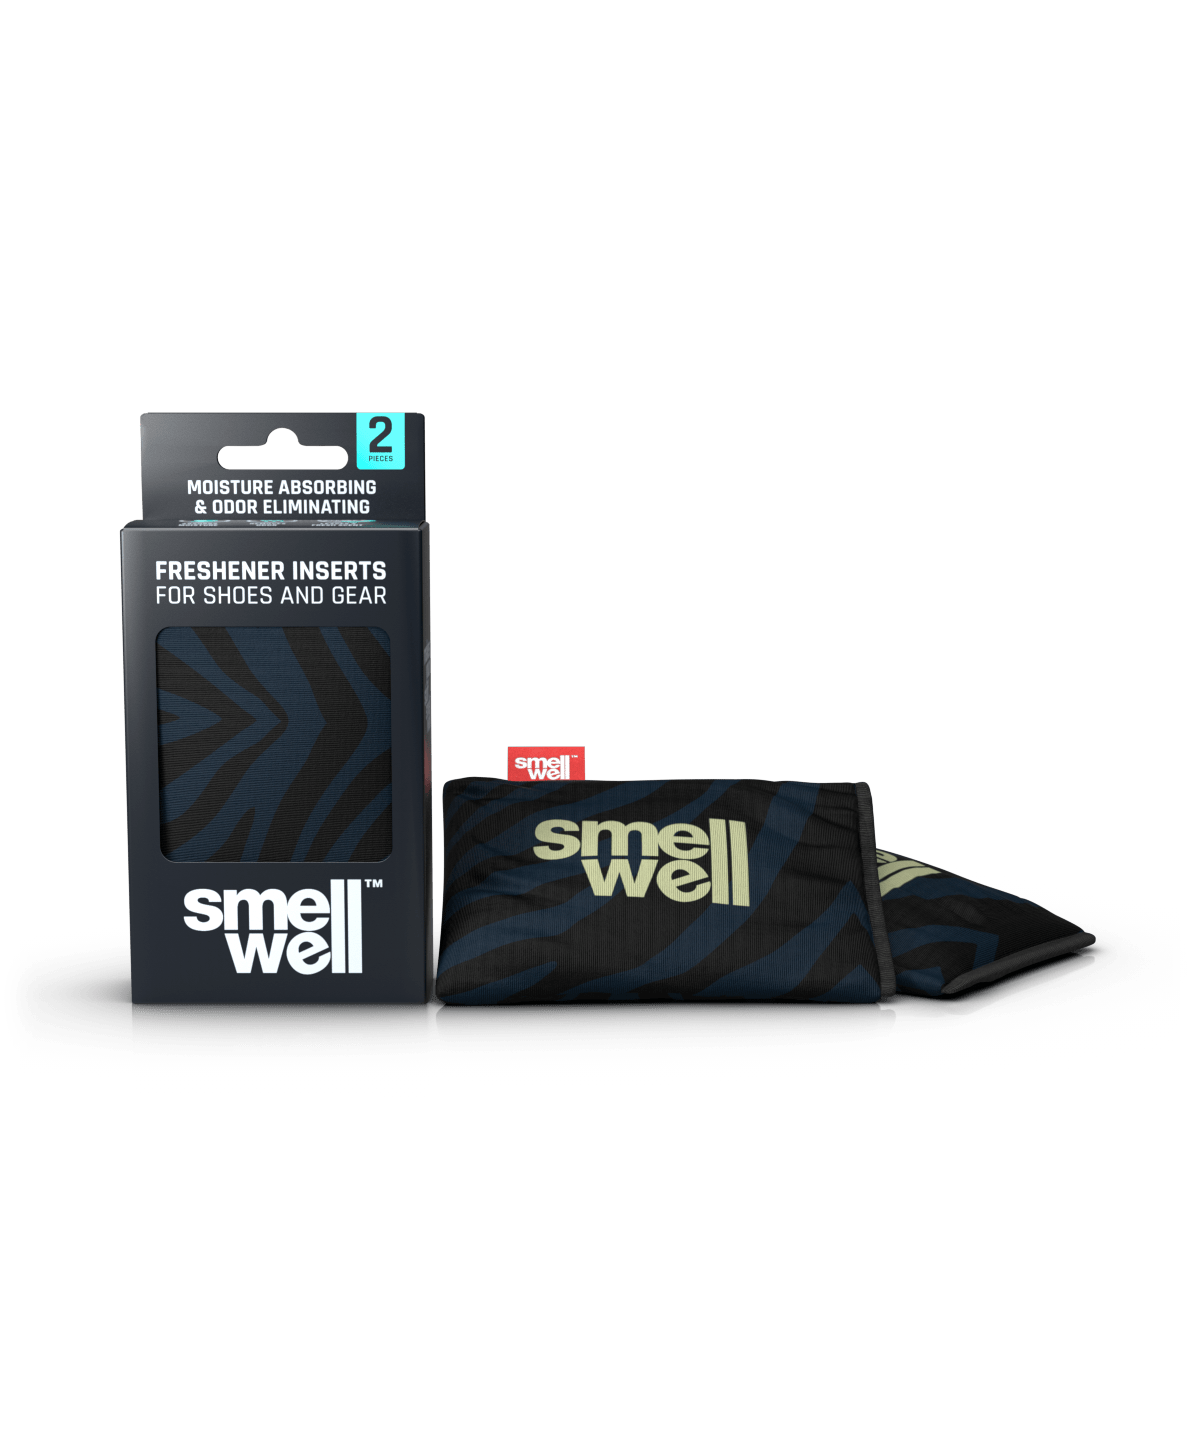 A package of SmellWell Active - Black Zebra and 2 SmellWell Active - Black Zebra freshener inserts bags next to it